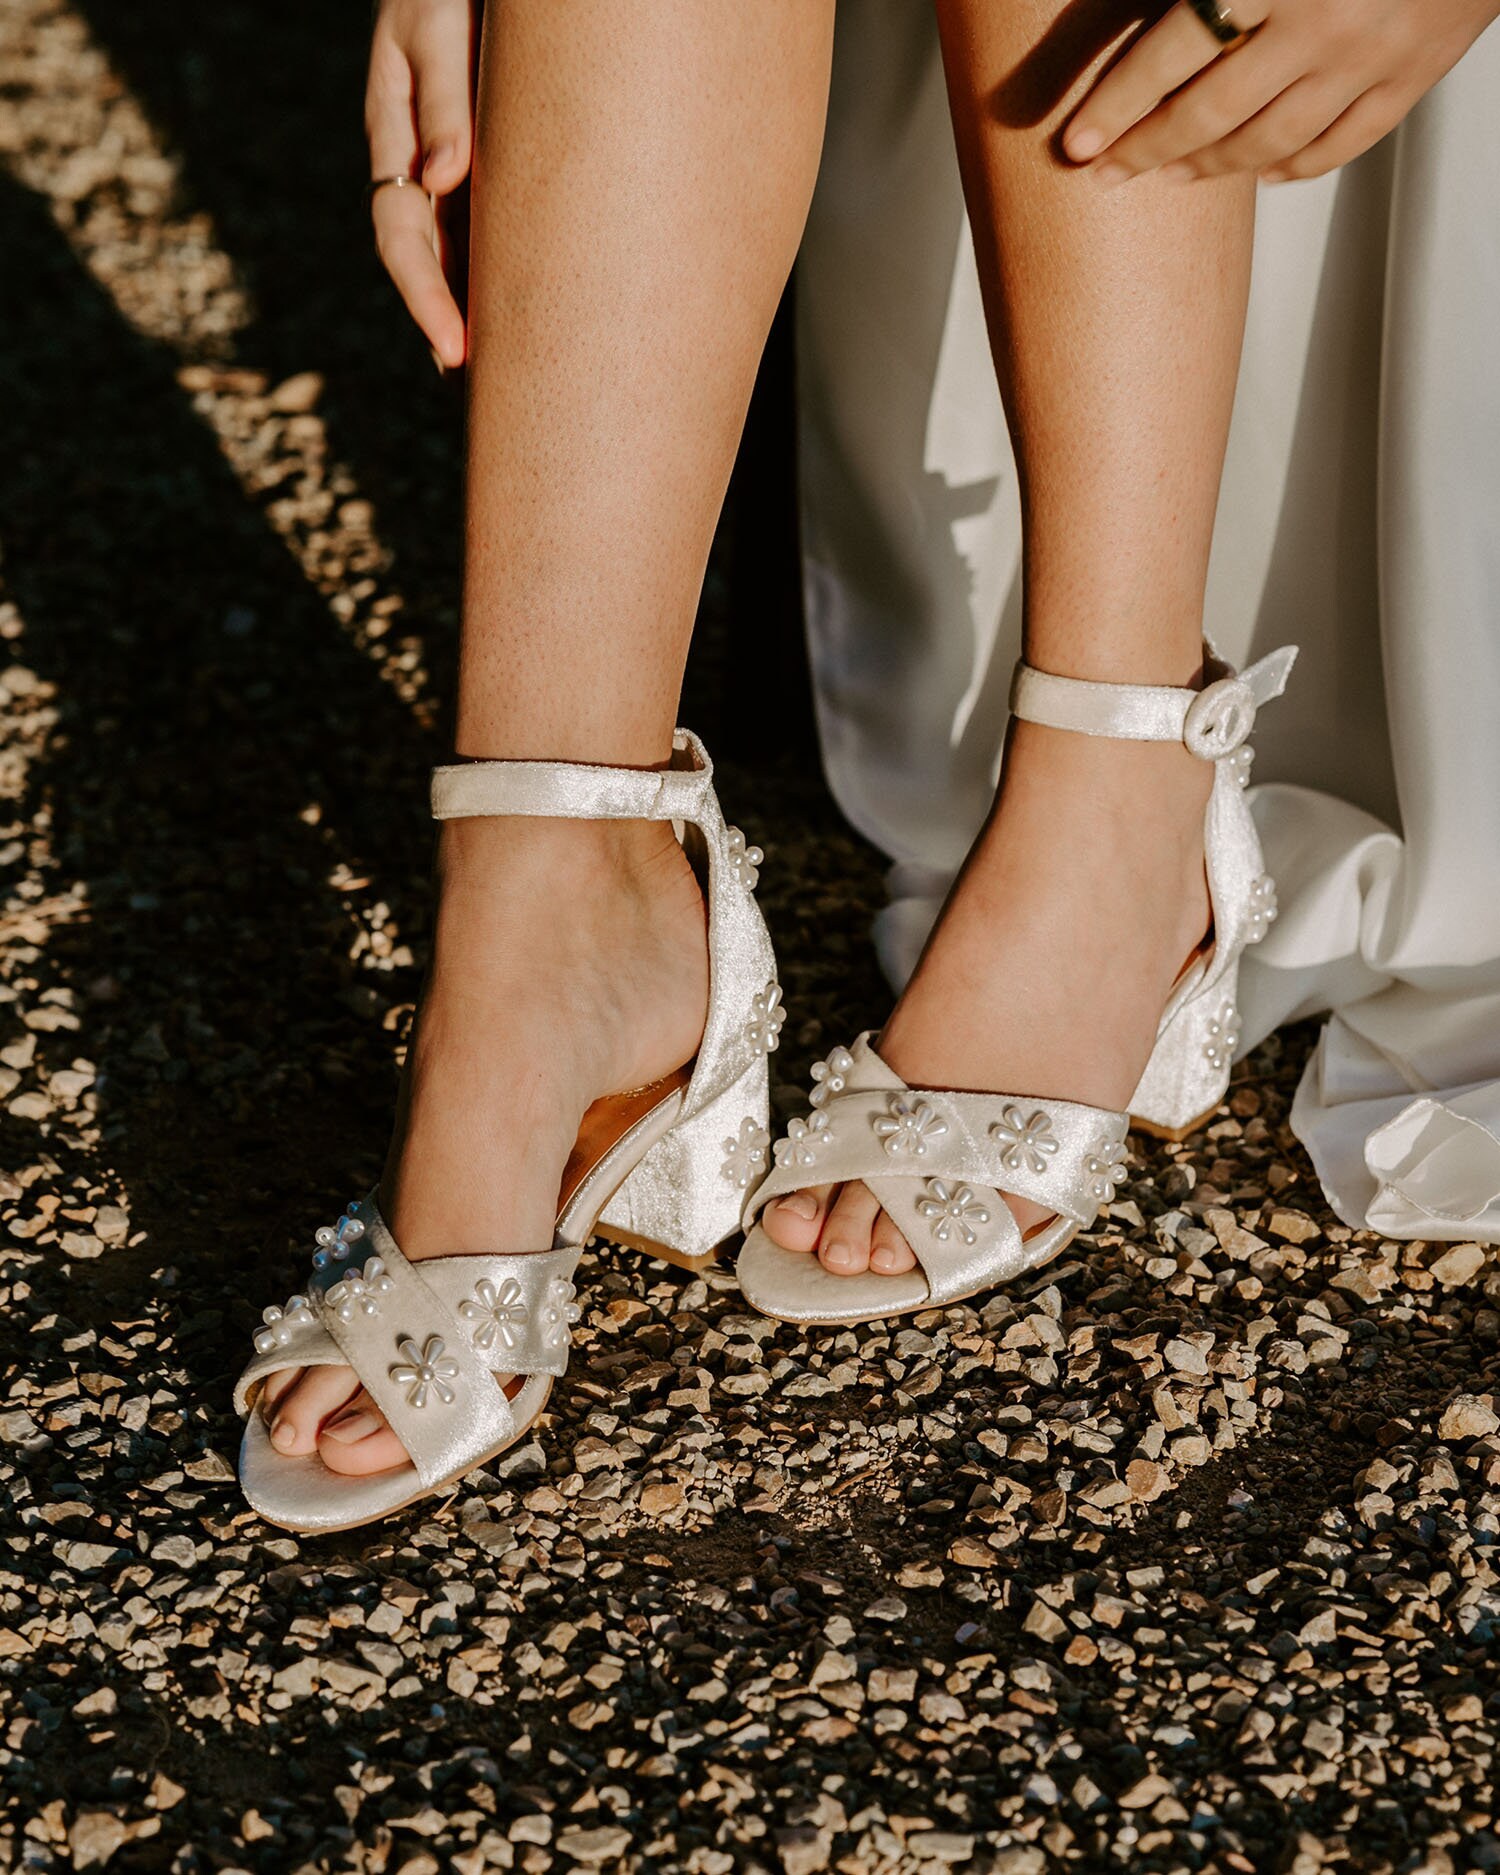 Rustic Wedding Shoes You Should Consider